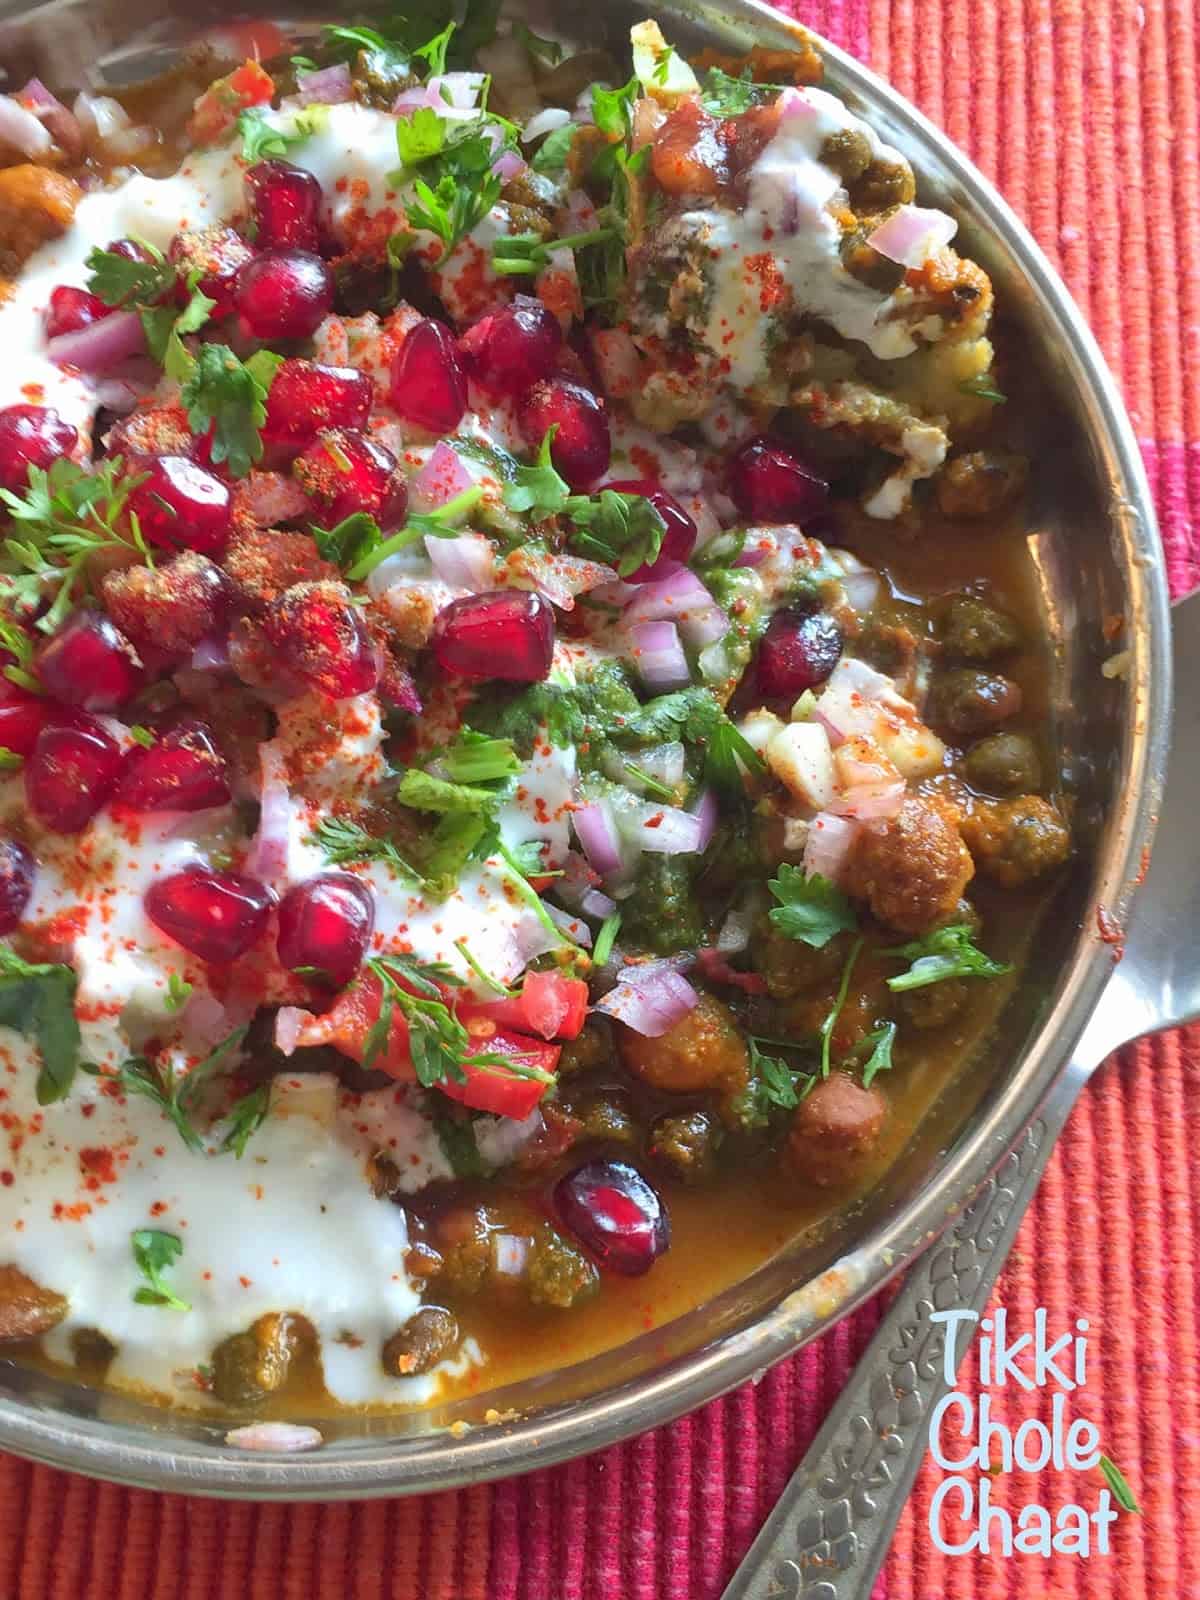 Tikki Chole Chaat is a delicious street food combining tikki (potato patties, shallow fried) with a spicy-tangy chickpea curry. Served topped with onions and chutney